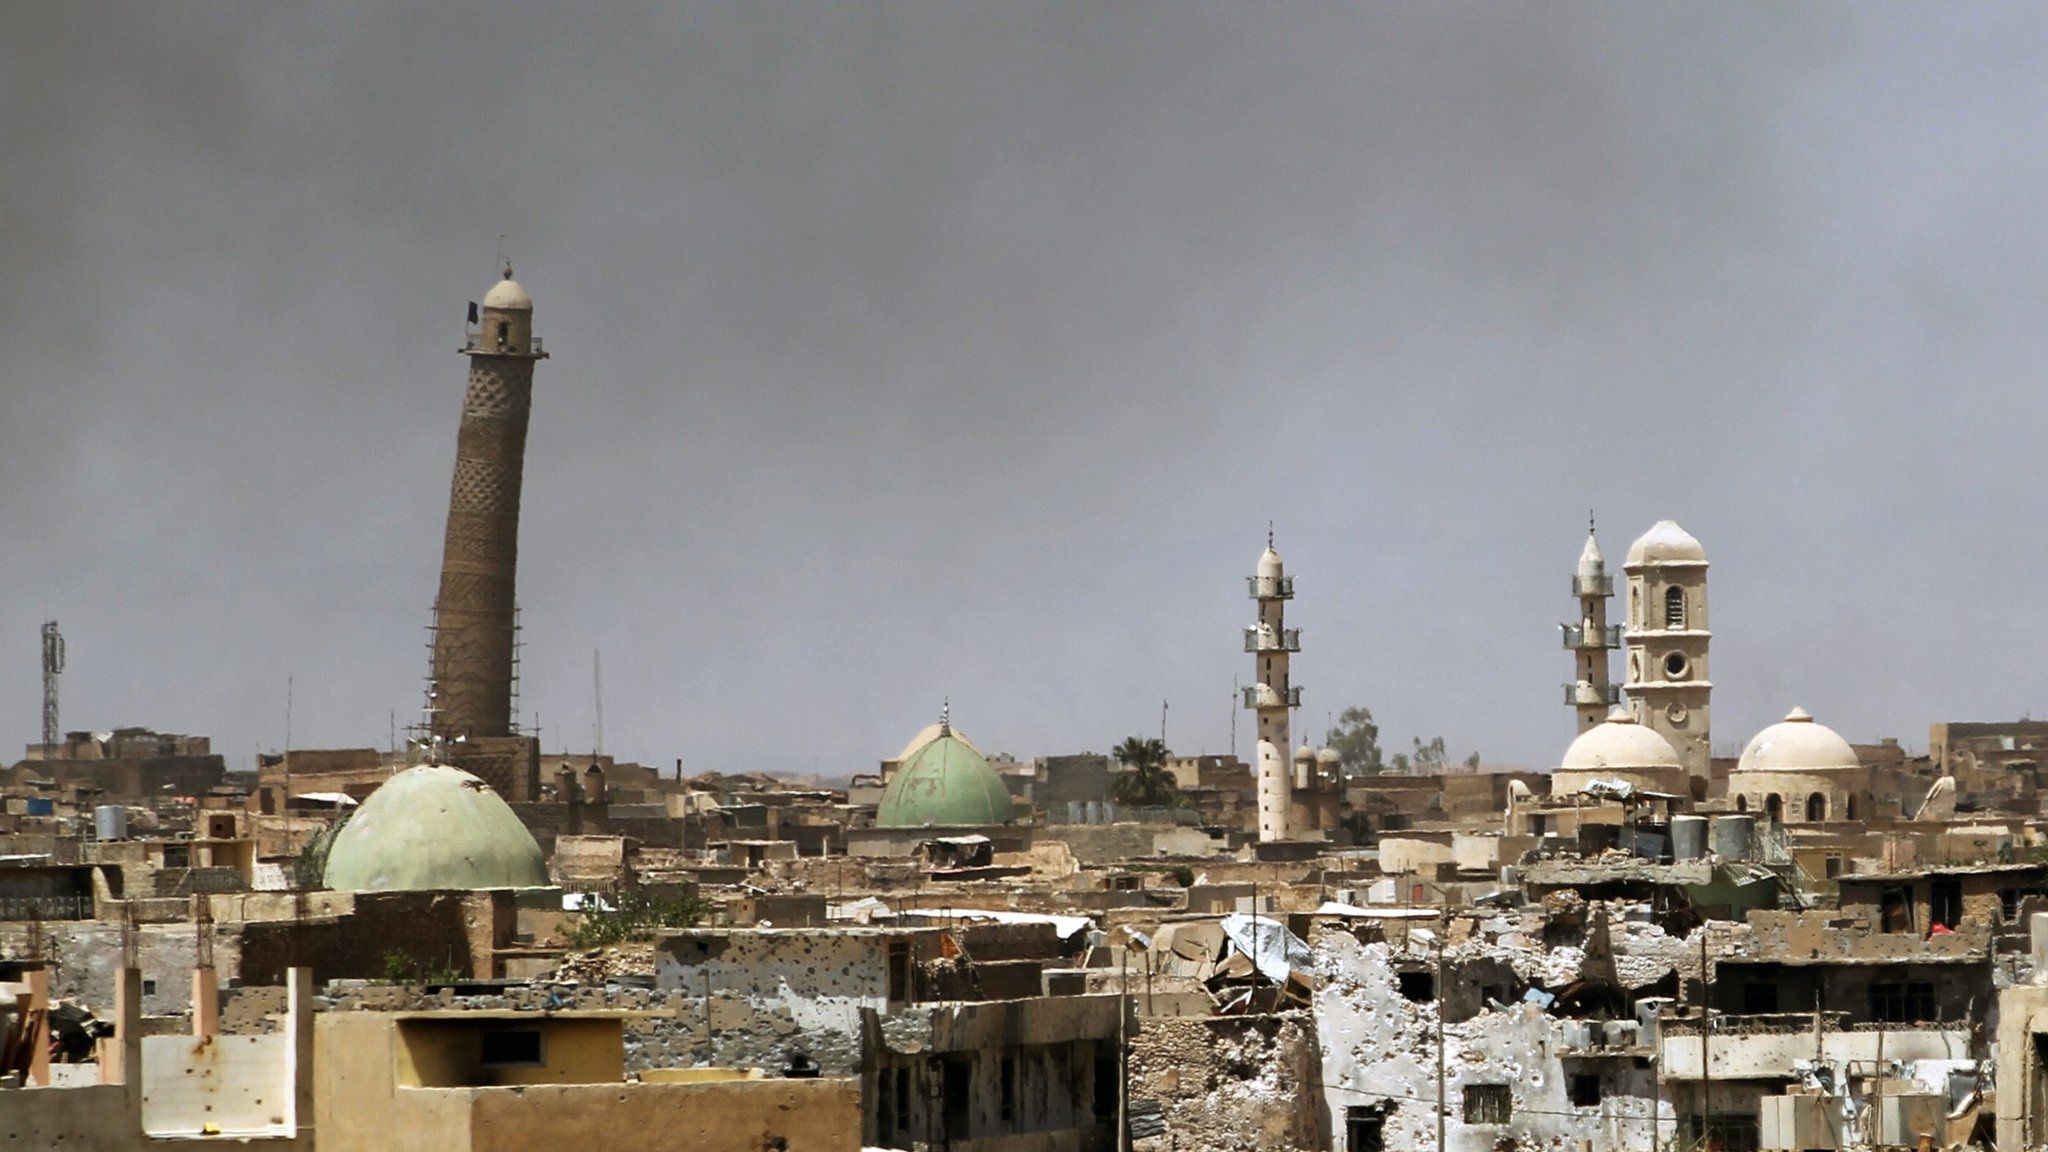 Mosque's minaret (pictured left) in Mosul on 24 May 2017